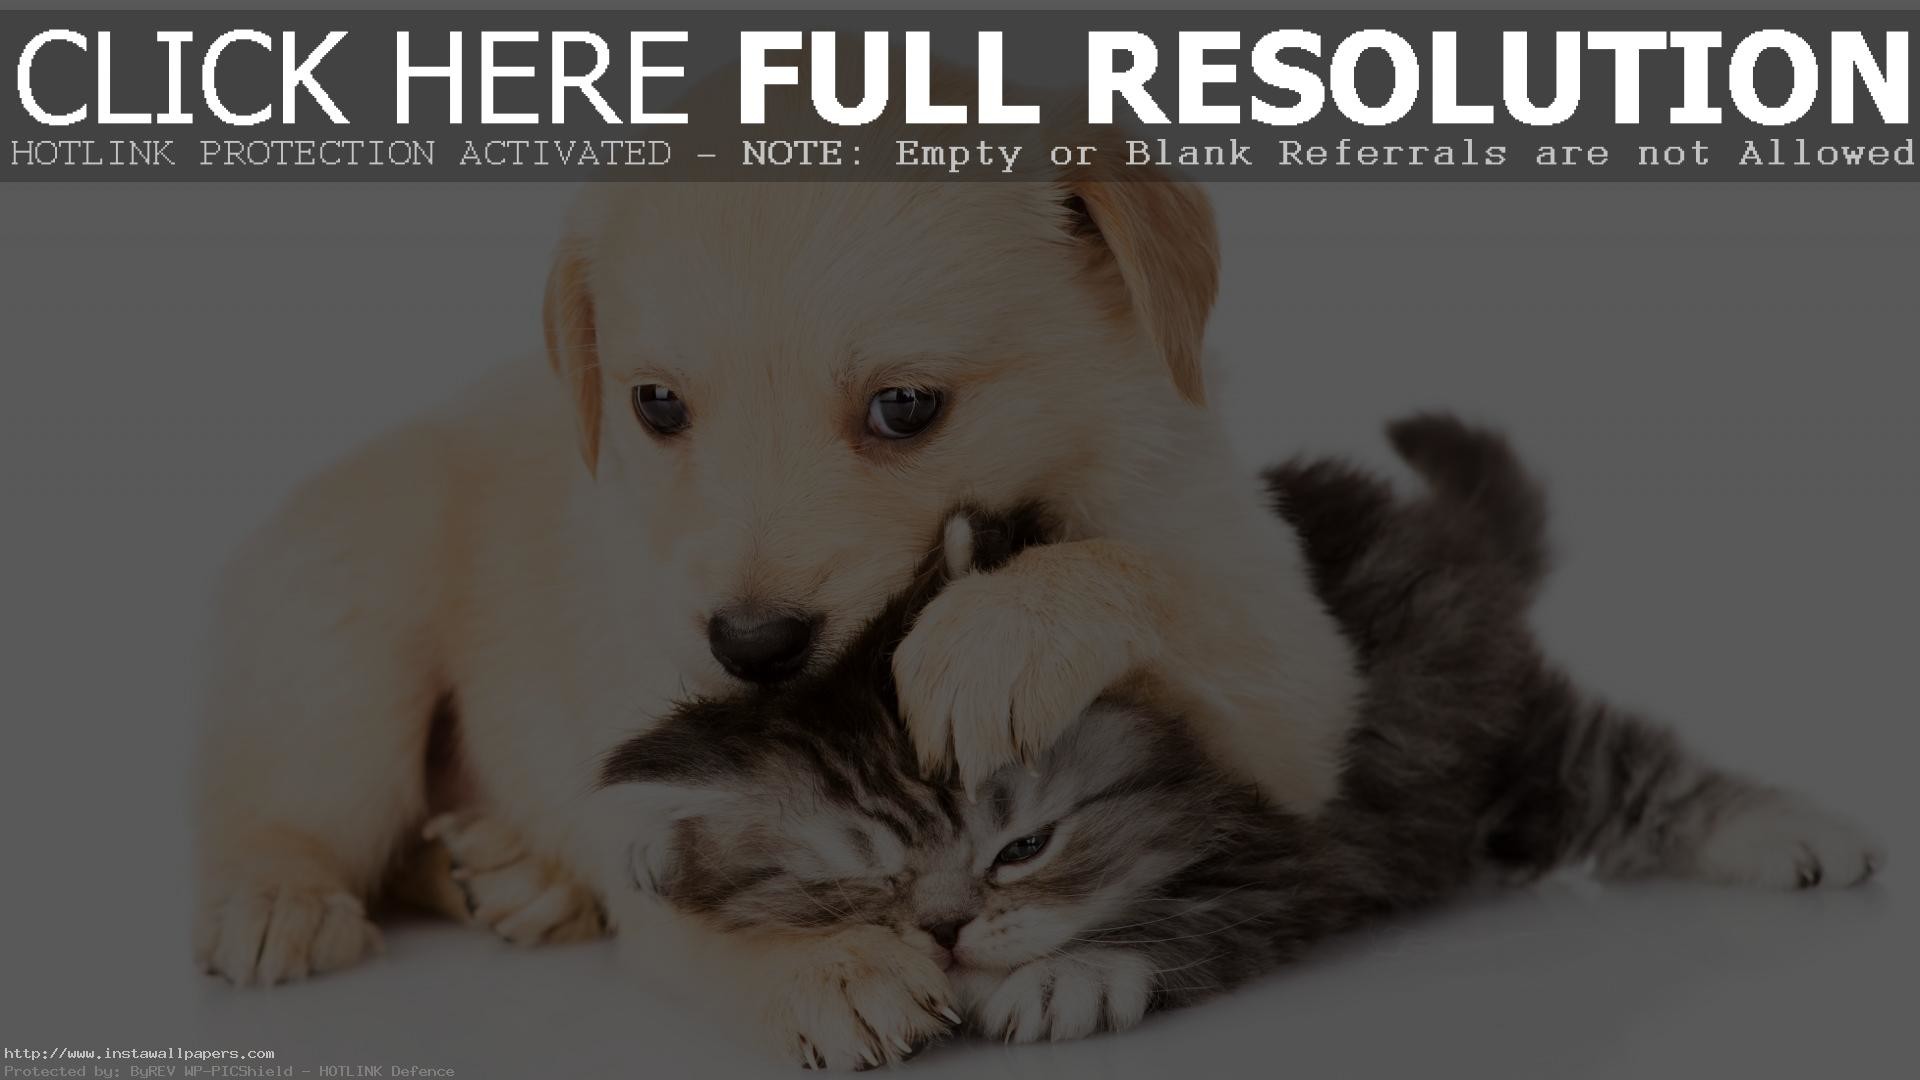 1920x1080 ... Kittens And Puppies Wallpapers 3D 4K wallpaper for desktop Cute Kittens  Puppies image download